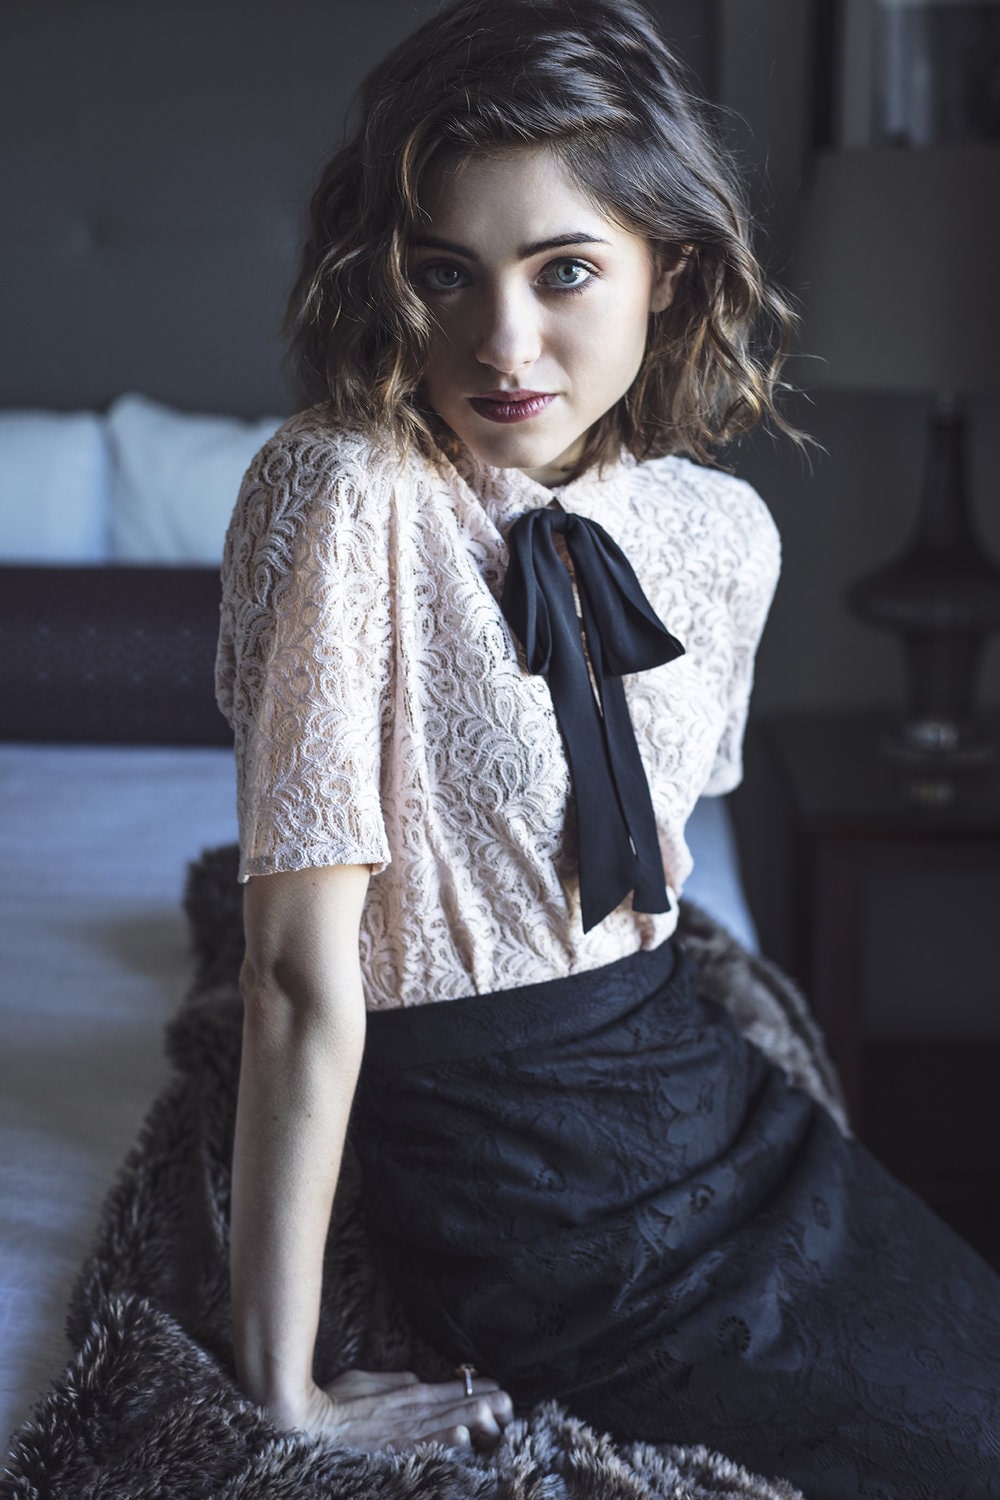 61 Hot Pictures Of Natalia Dyer Is Going To Make You Drool ...